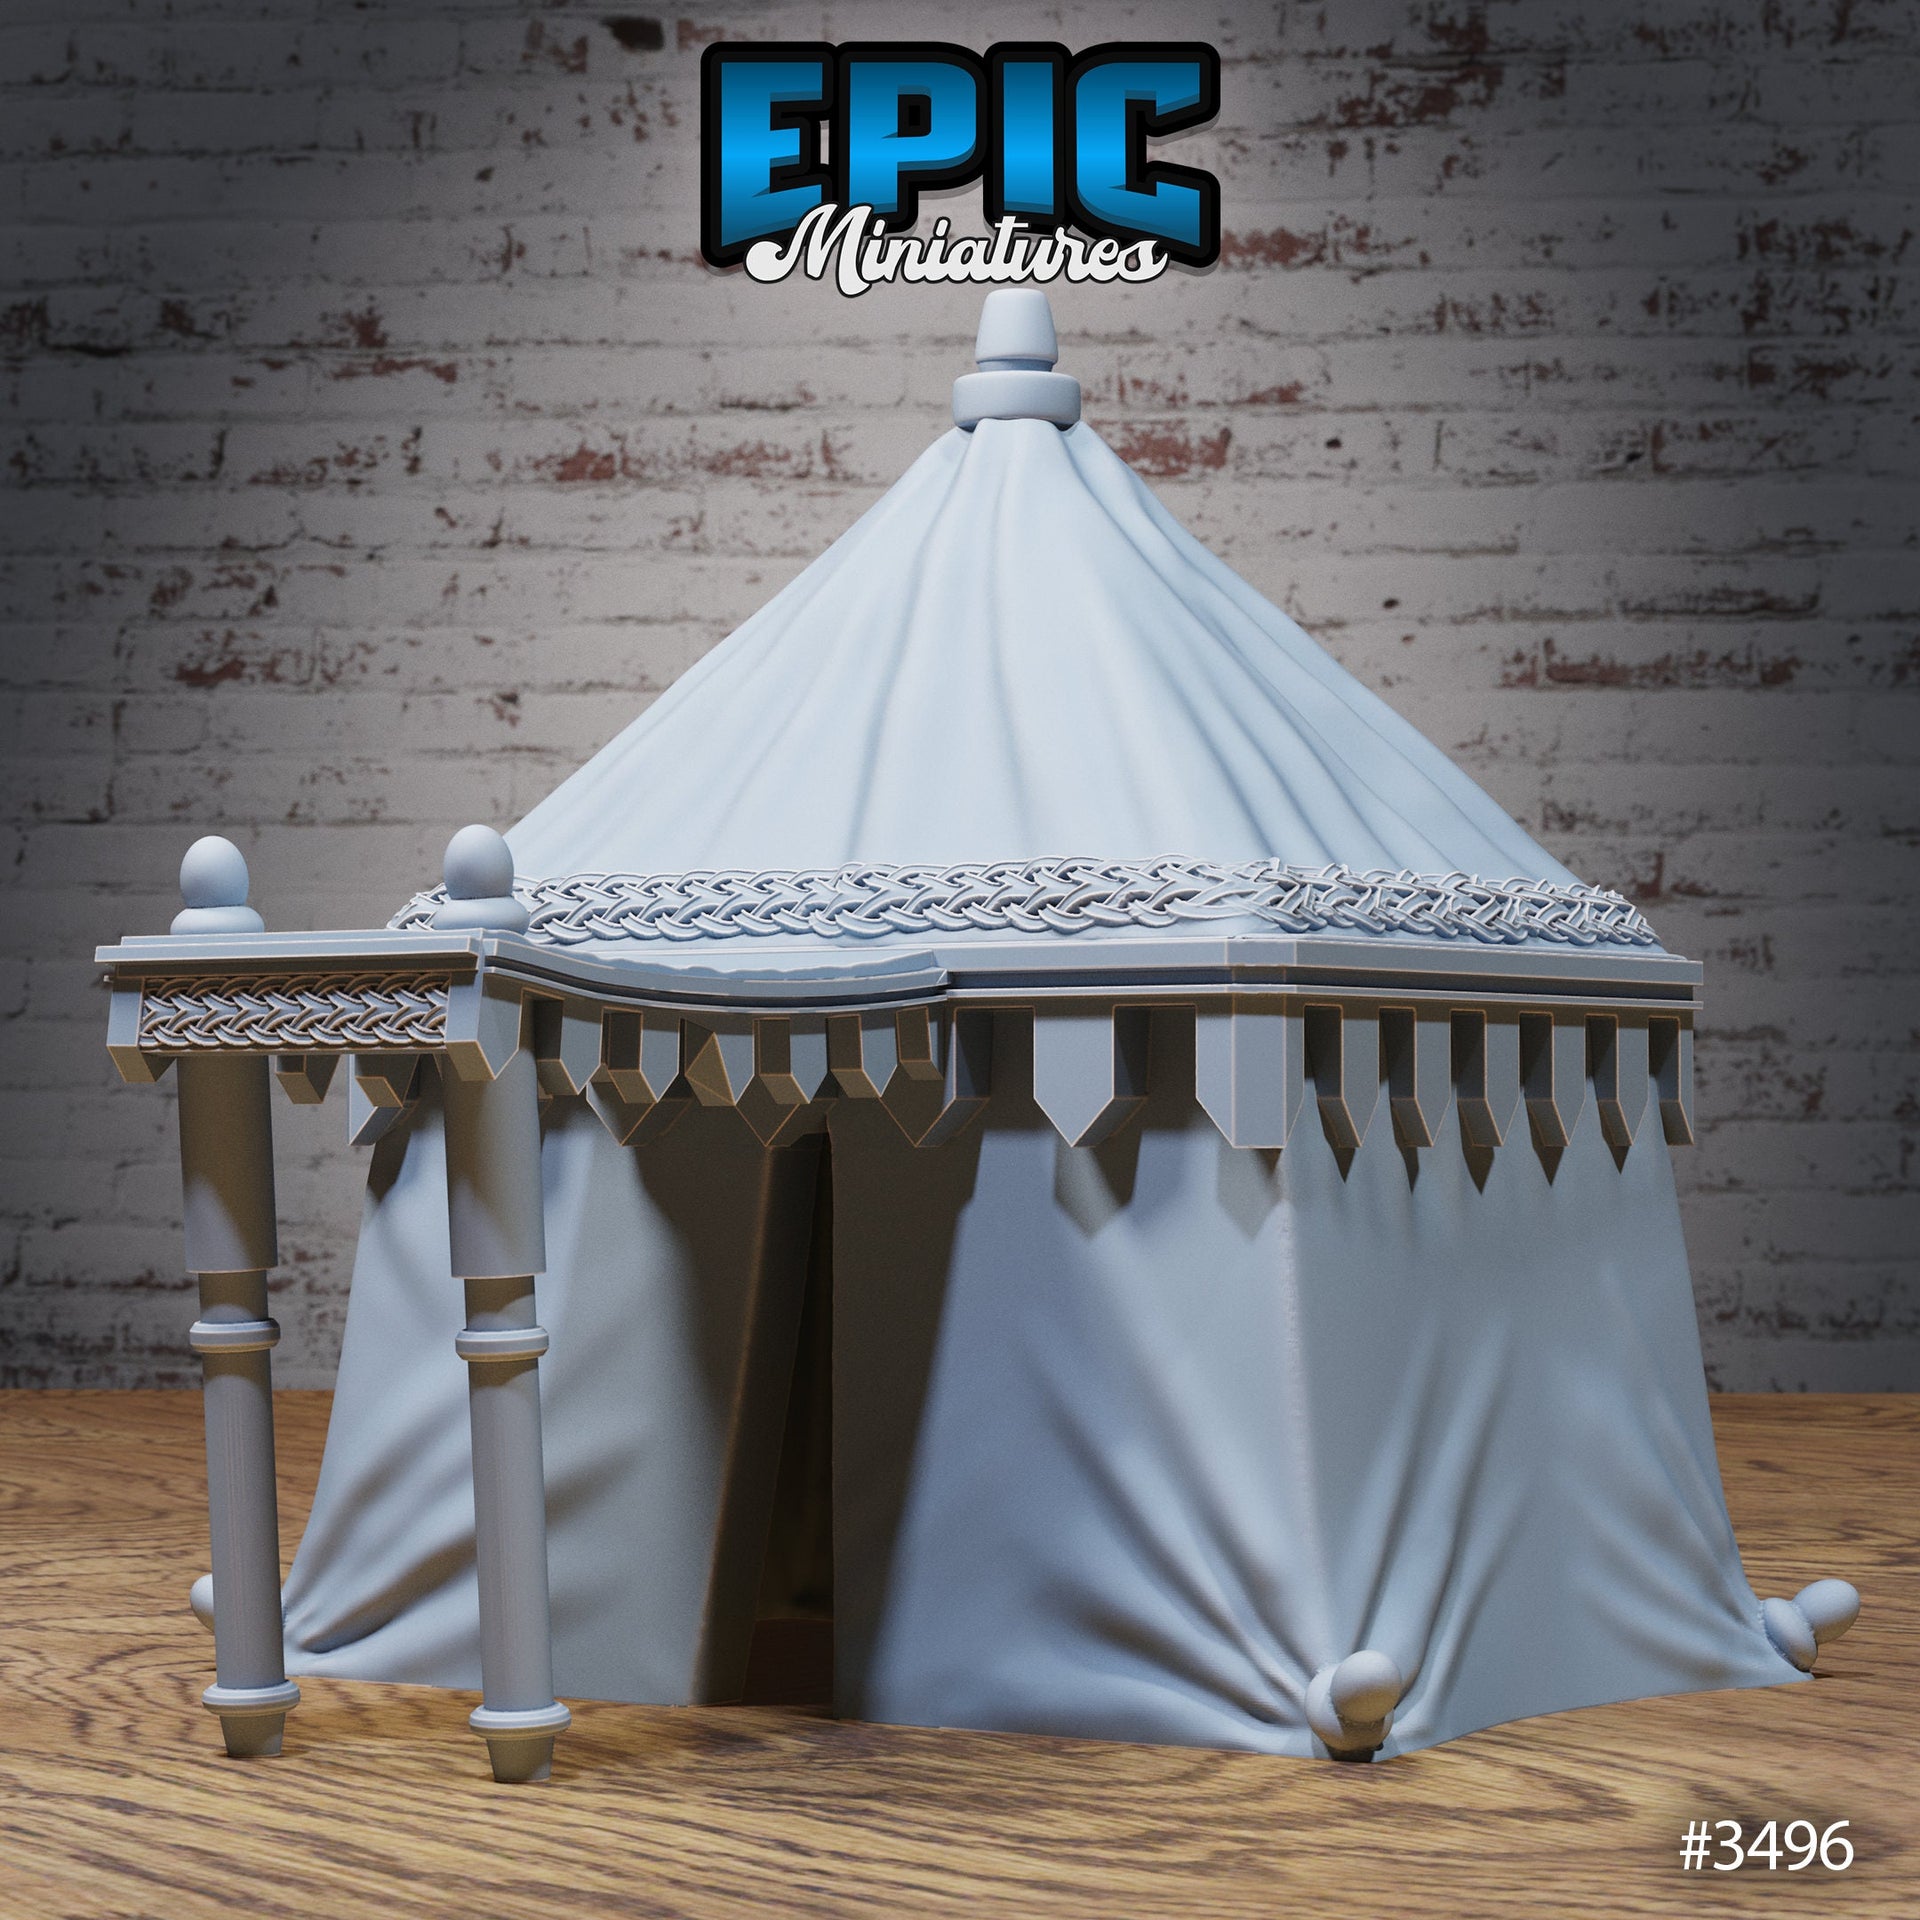 Carnival Tents - Epic Miniatures | Ninth Age | 32mm | Nightsky Carnival | Circus | Big Top | Stands | Ring